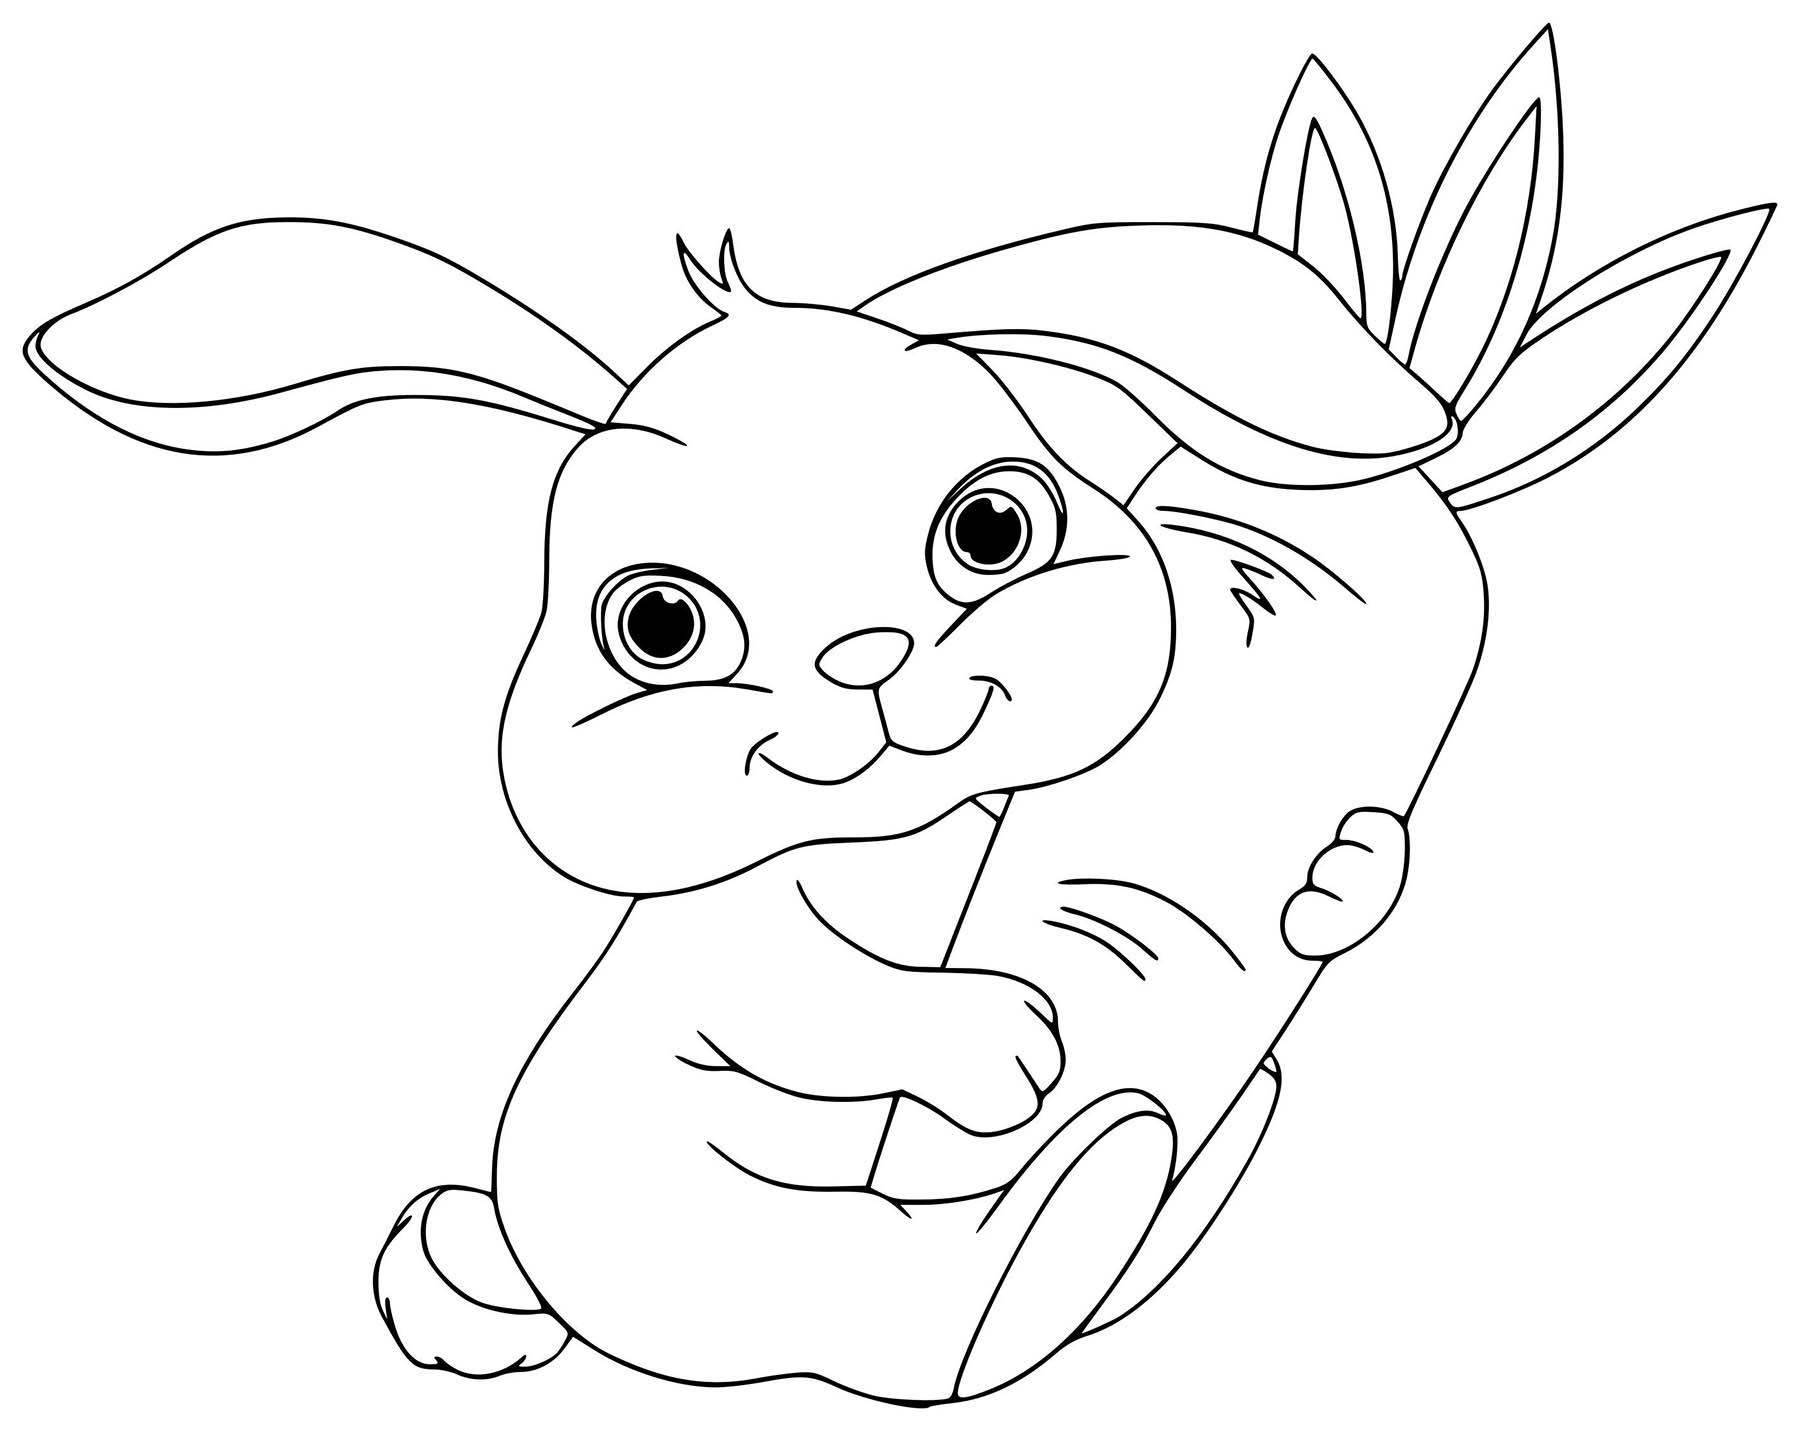 bunny-coloring-pages-free-printable